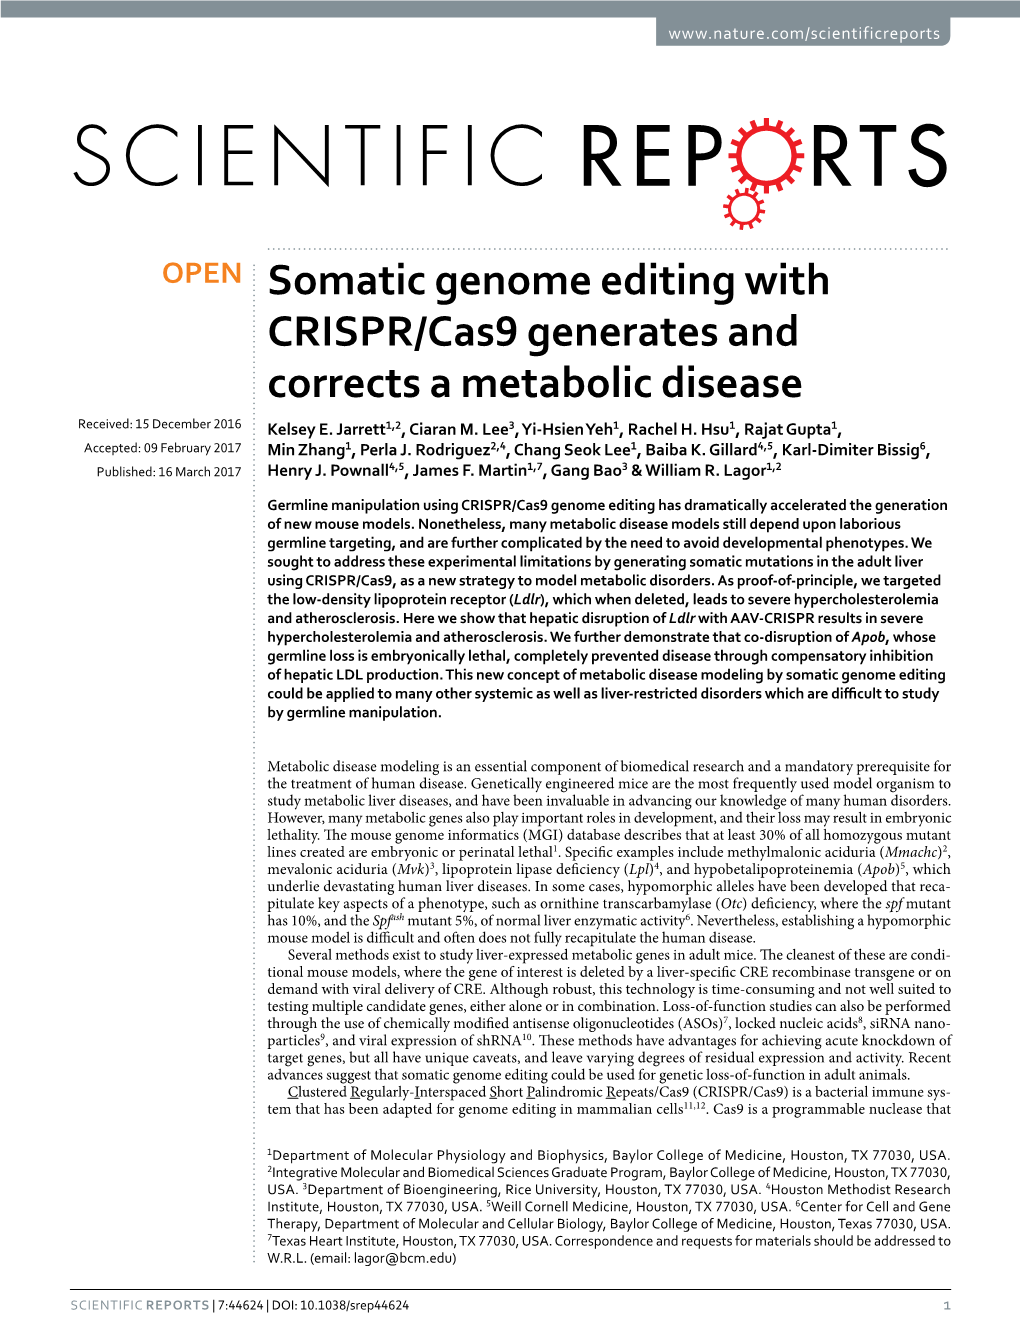 Somatic Genome Editing with CRISPR/Cas9 Generates and Corrects a Metabolic Disease Received: 15 December 2016 Kelsey E